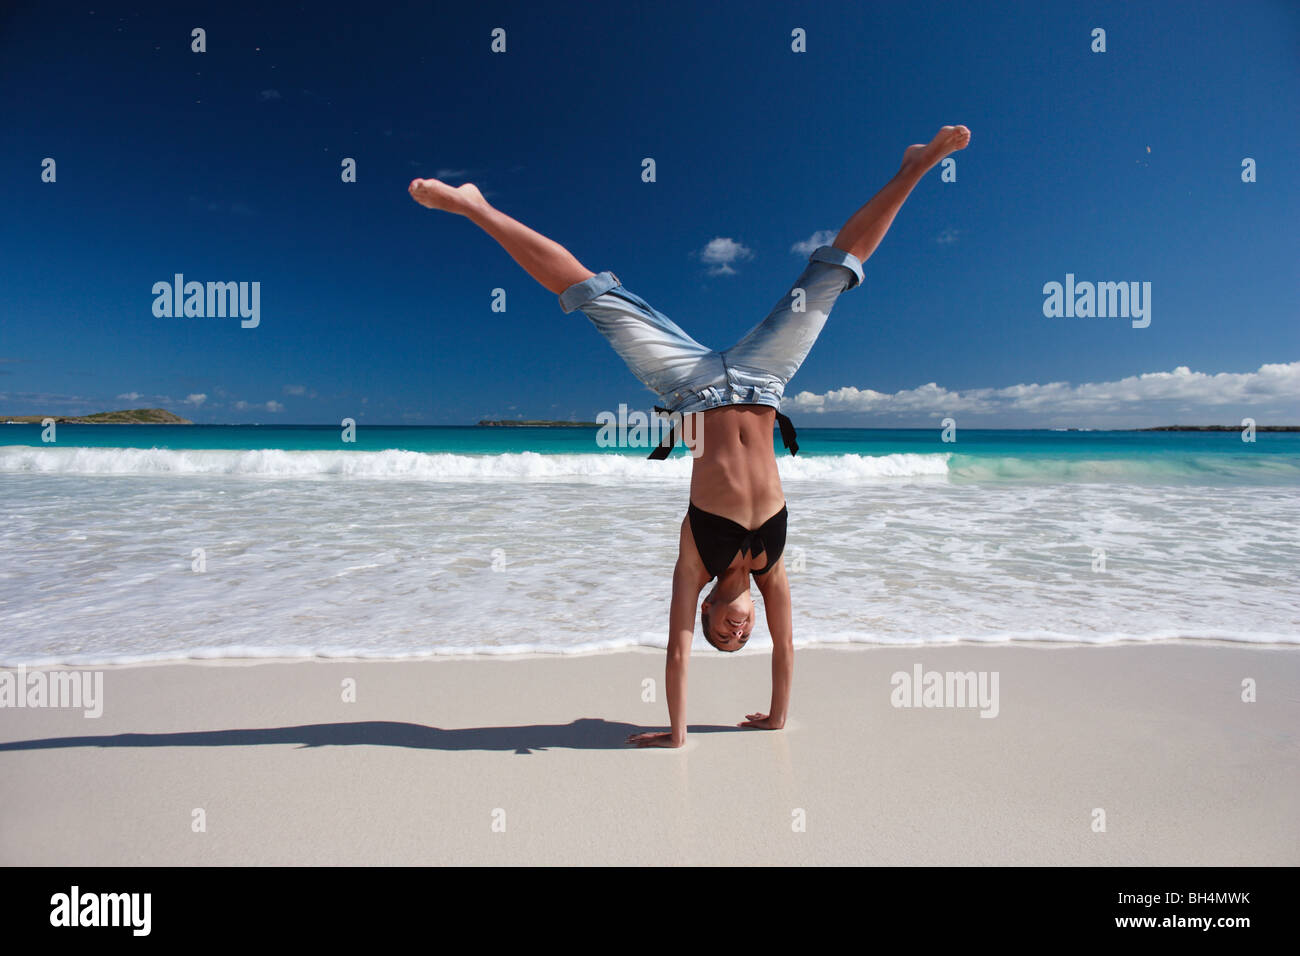 Young woman performing a hand stand on a deserted tropical beach Stock Photo